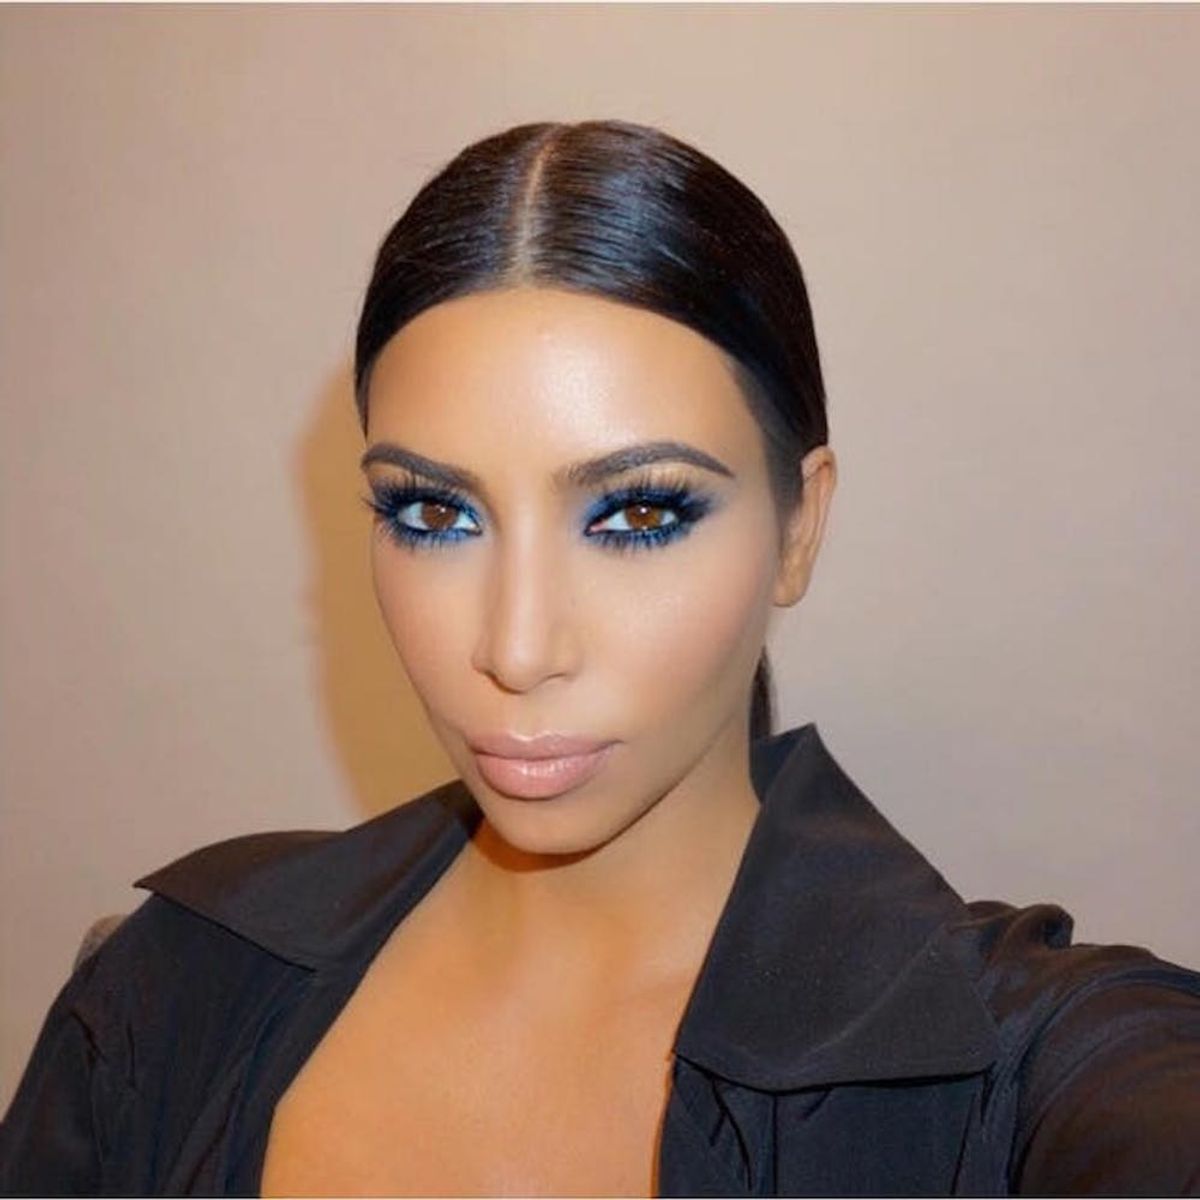 Kim Kardashian Will Inspire You to Update Your Go-To Makeup Look